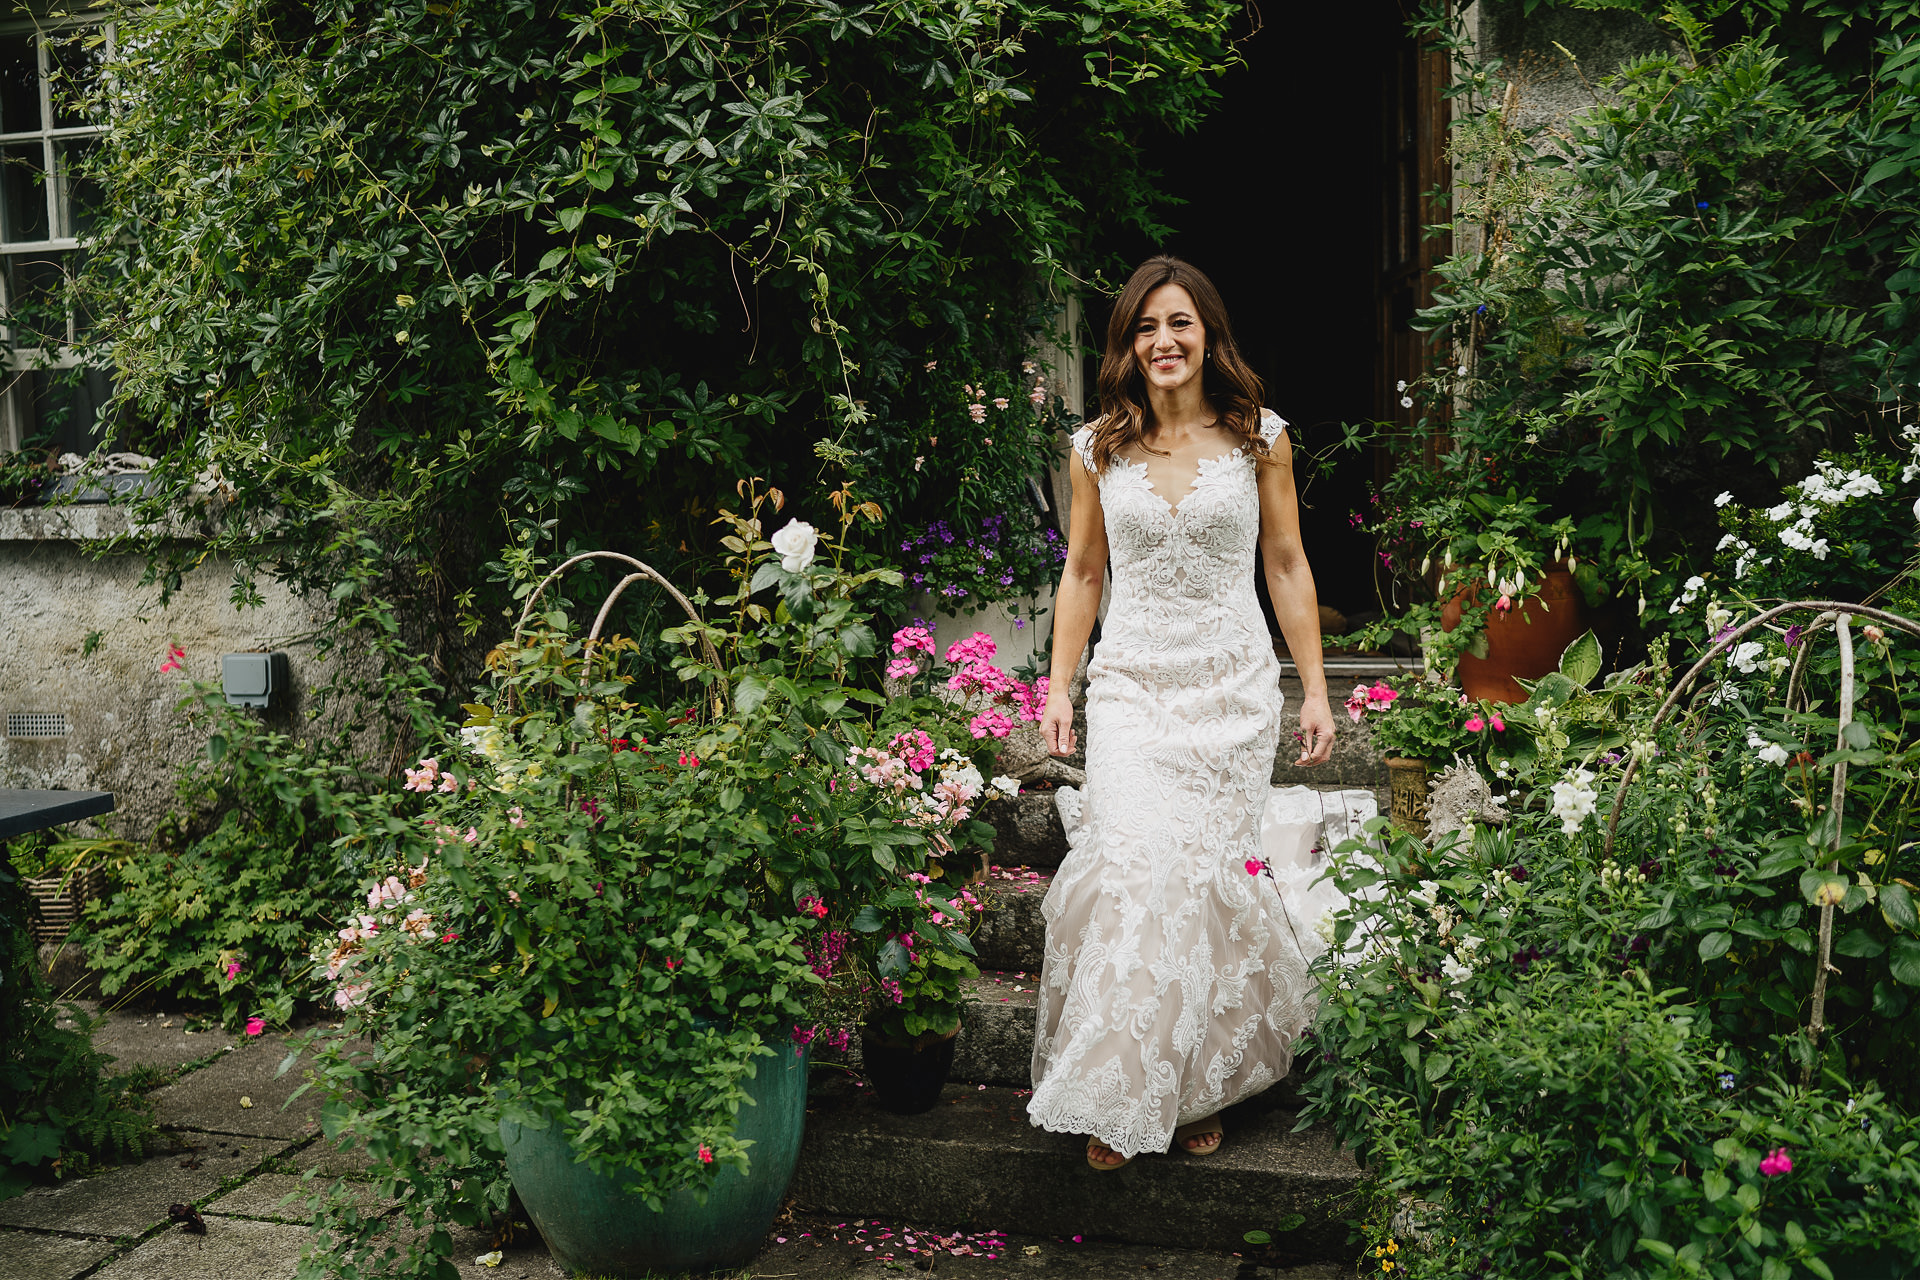 A beautiful bride down steps surrounded by garden flowers